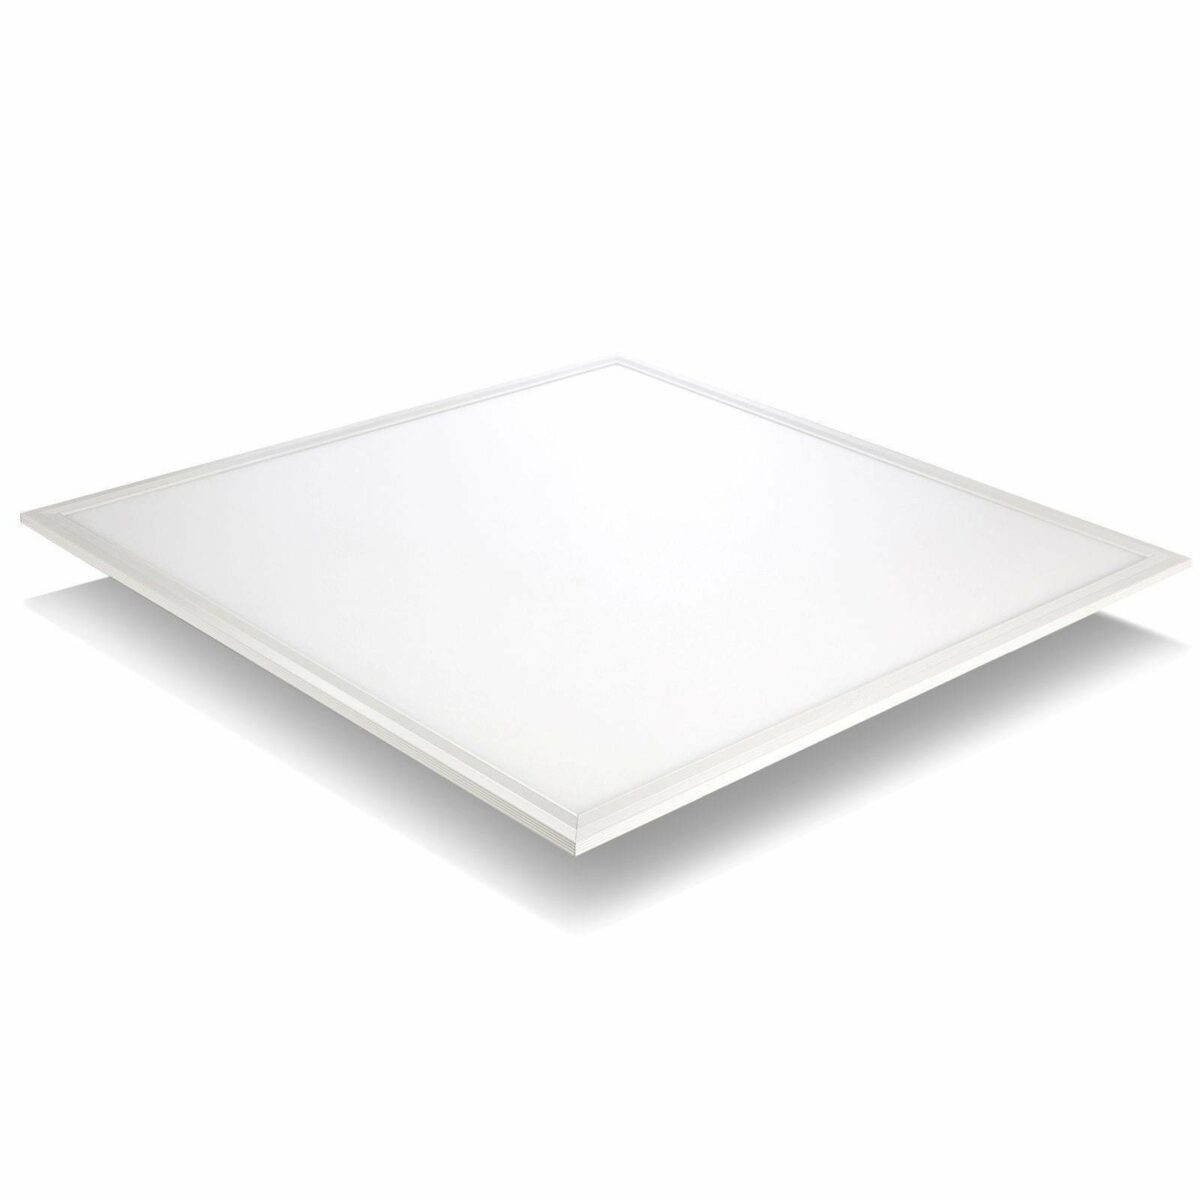 10 x [300x300] ABIS LED Panels 6,000K to 6,500K 100Lumens Per Watt for Ceilings Includes All Accessories (6000K to 6500K, 300 x 300) - ABIS